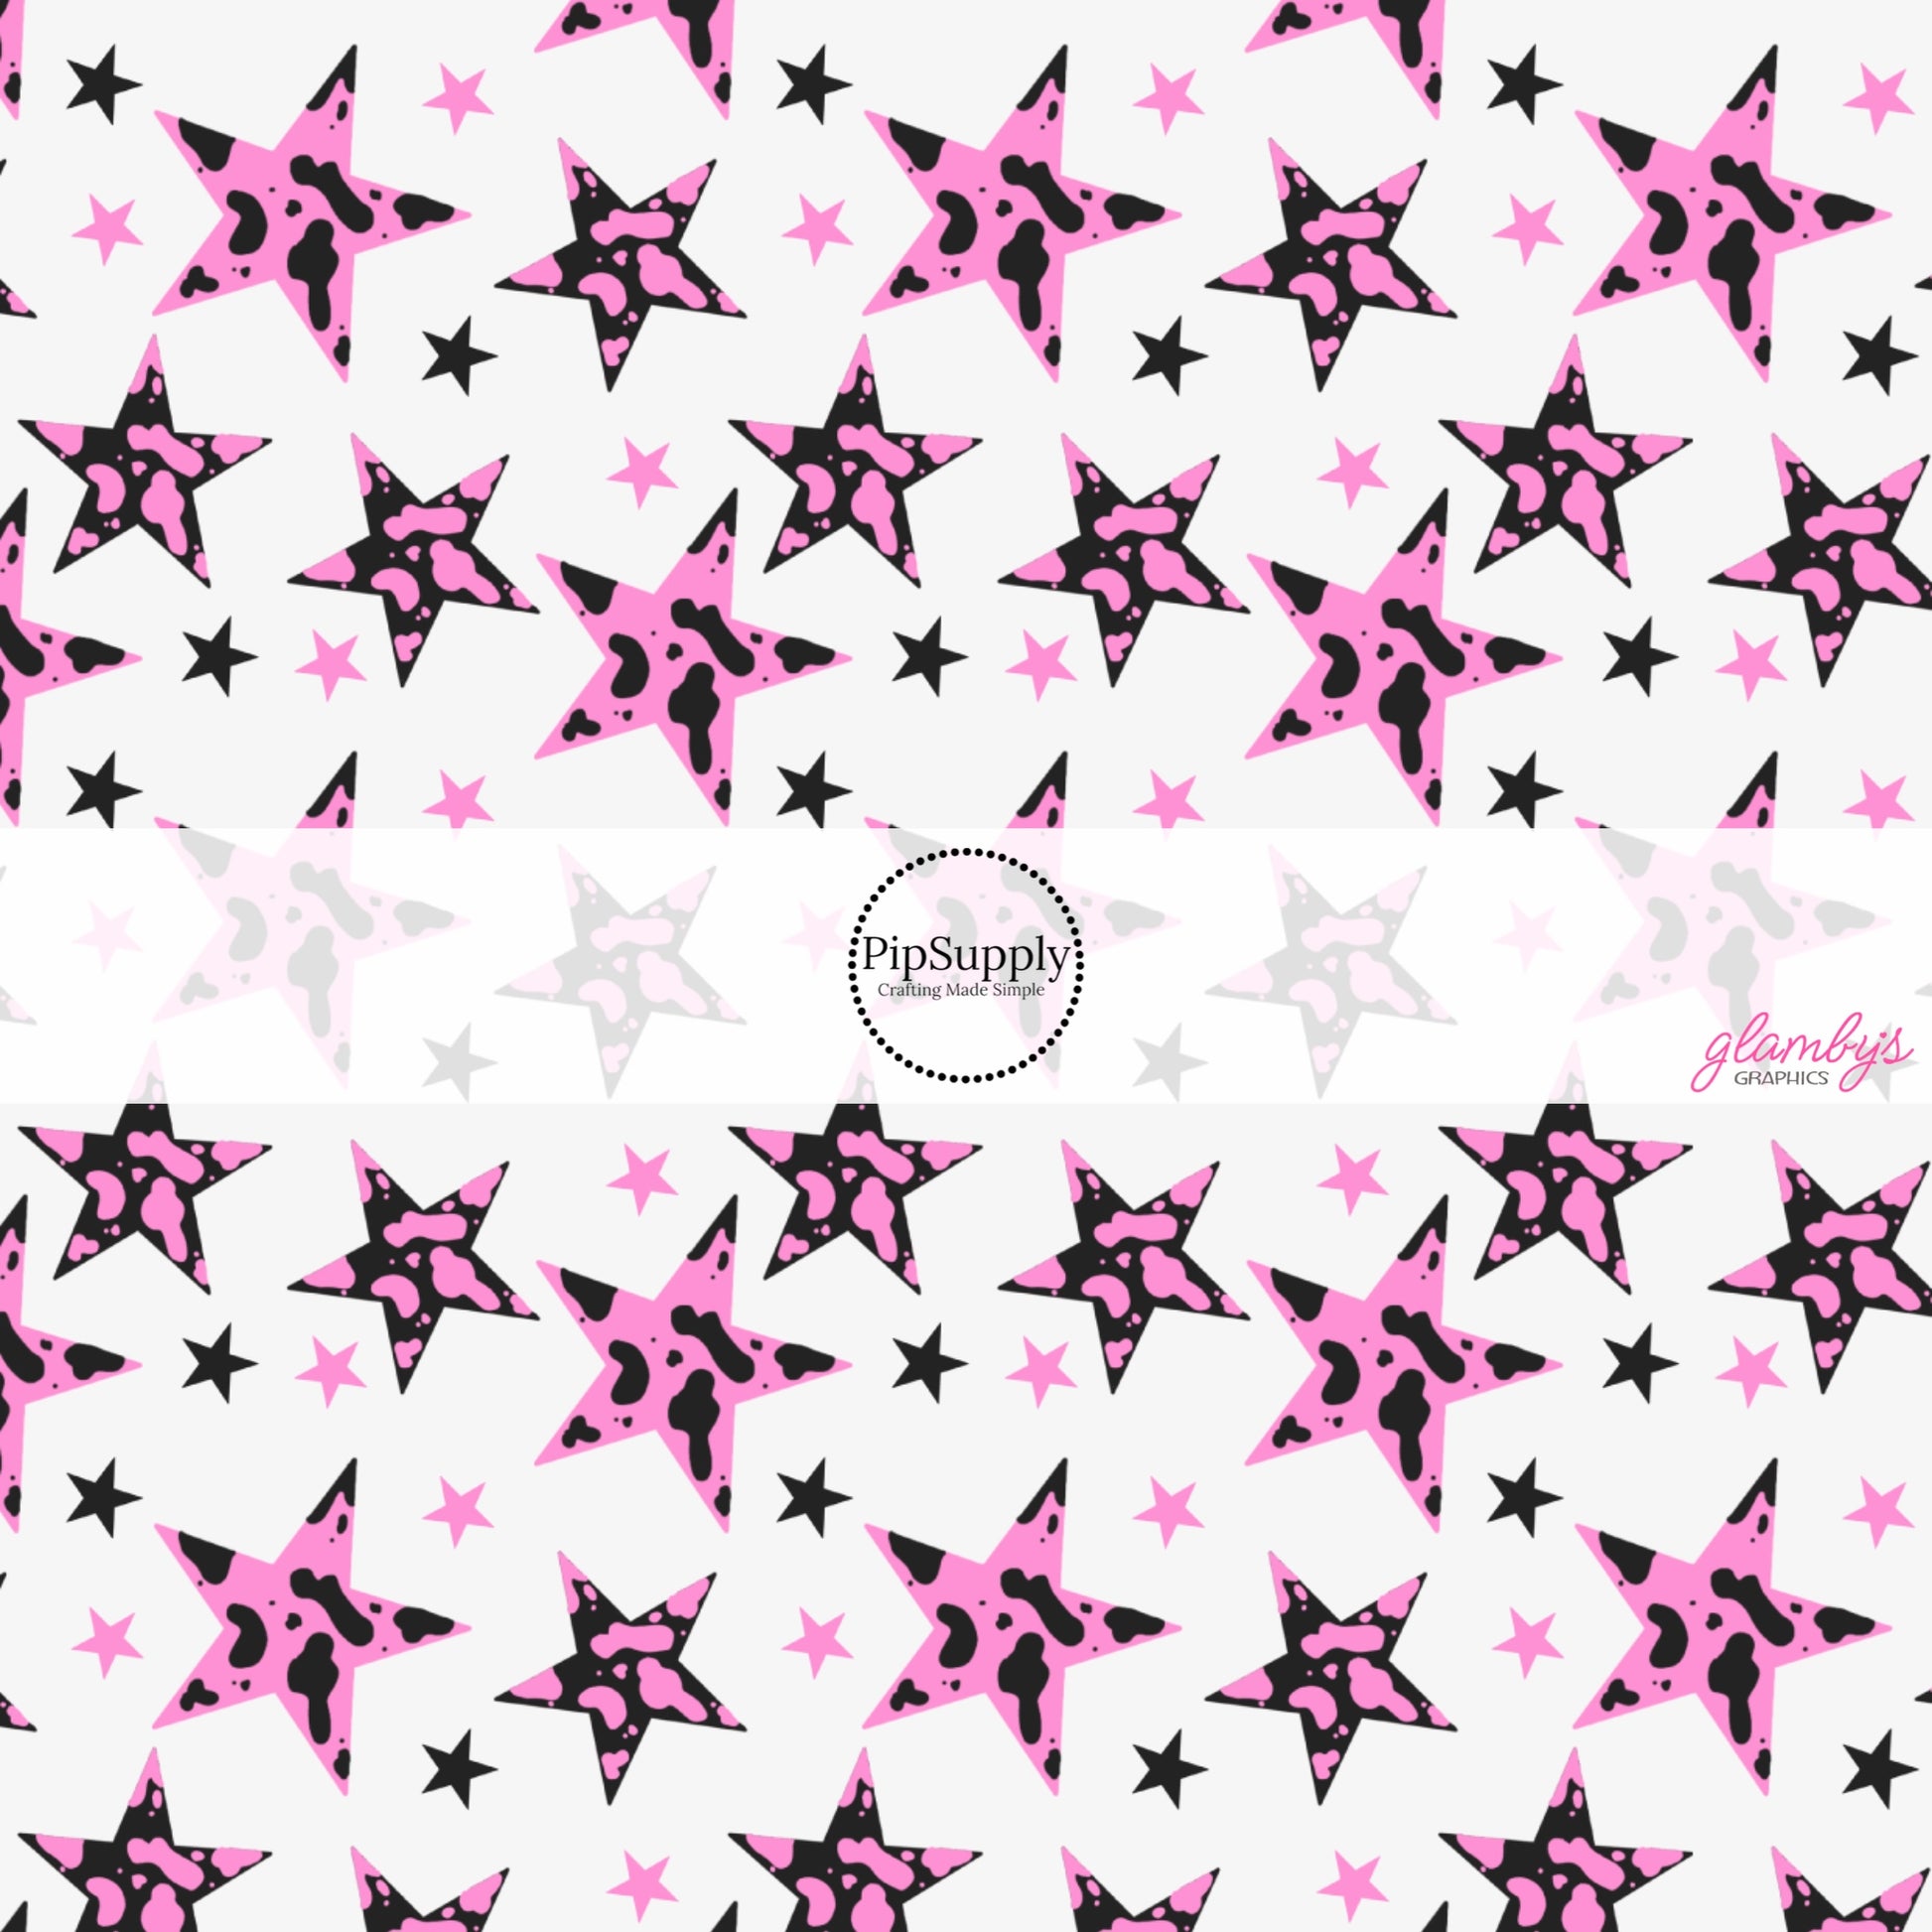 Pink and Black Cow Print Stars on Pale Pink Fabric by the Yard.